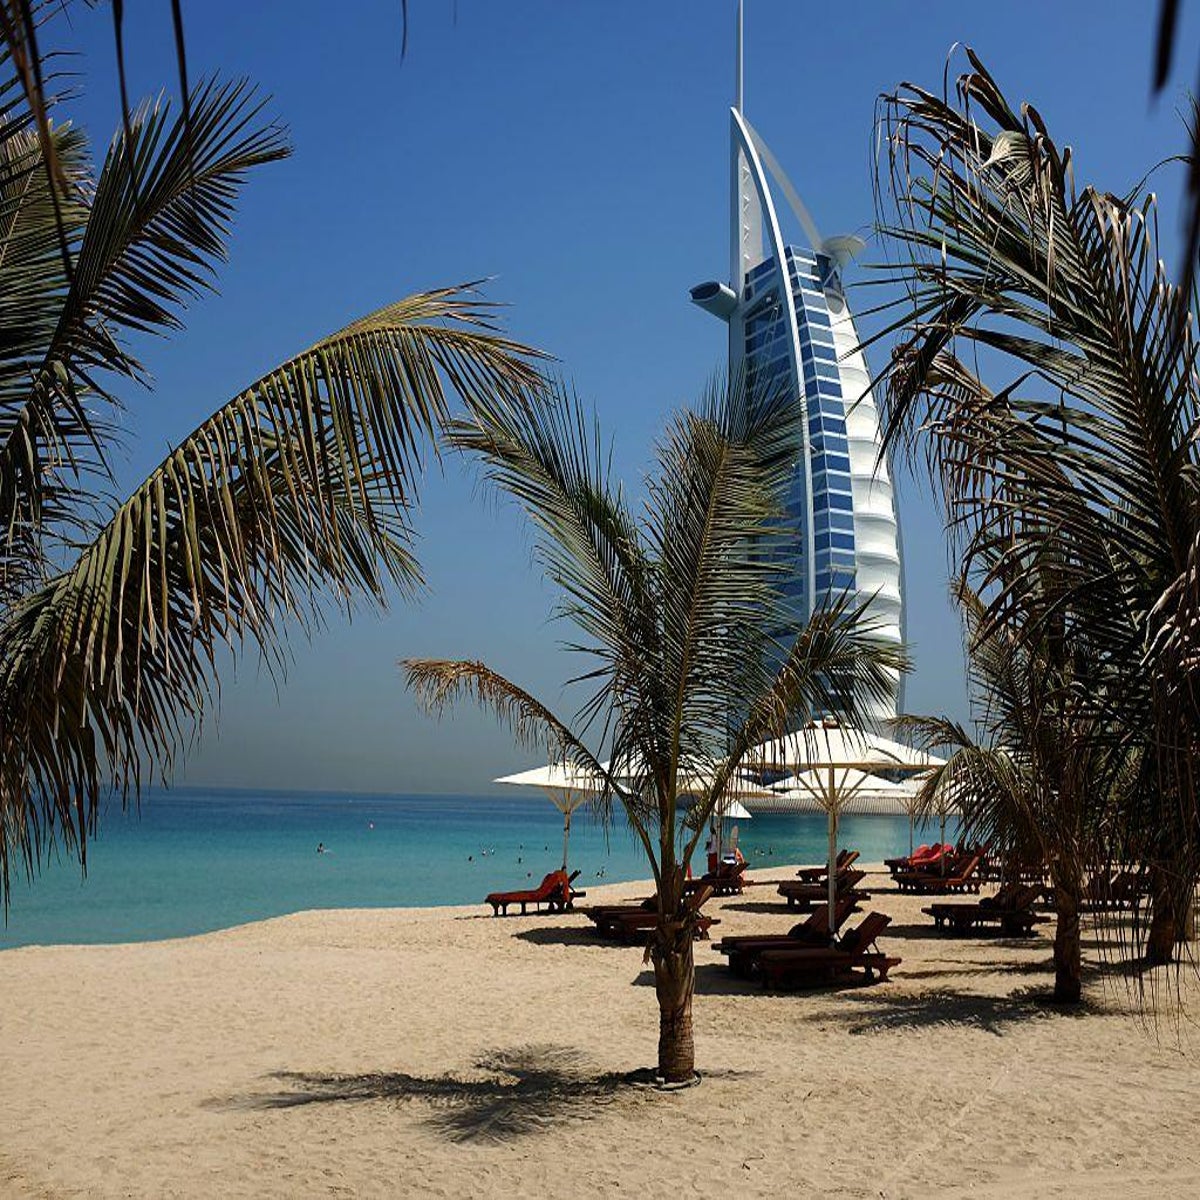 Topless Beach Sports - What not to do in Dubai as a tourist | The Independent | The Independent